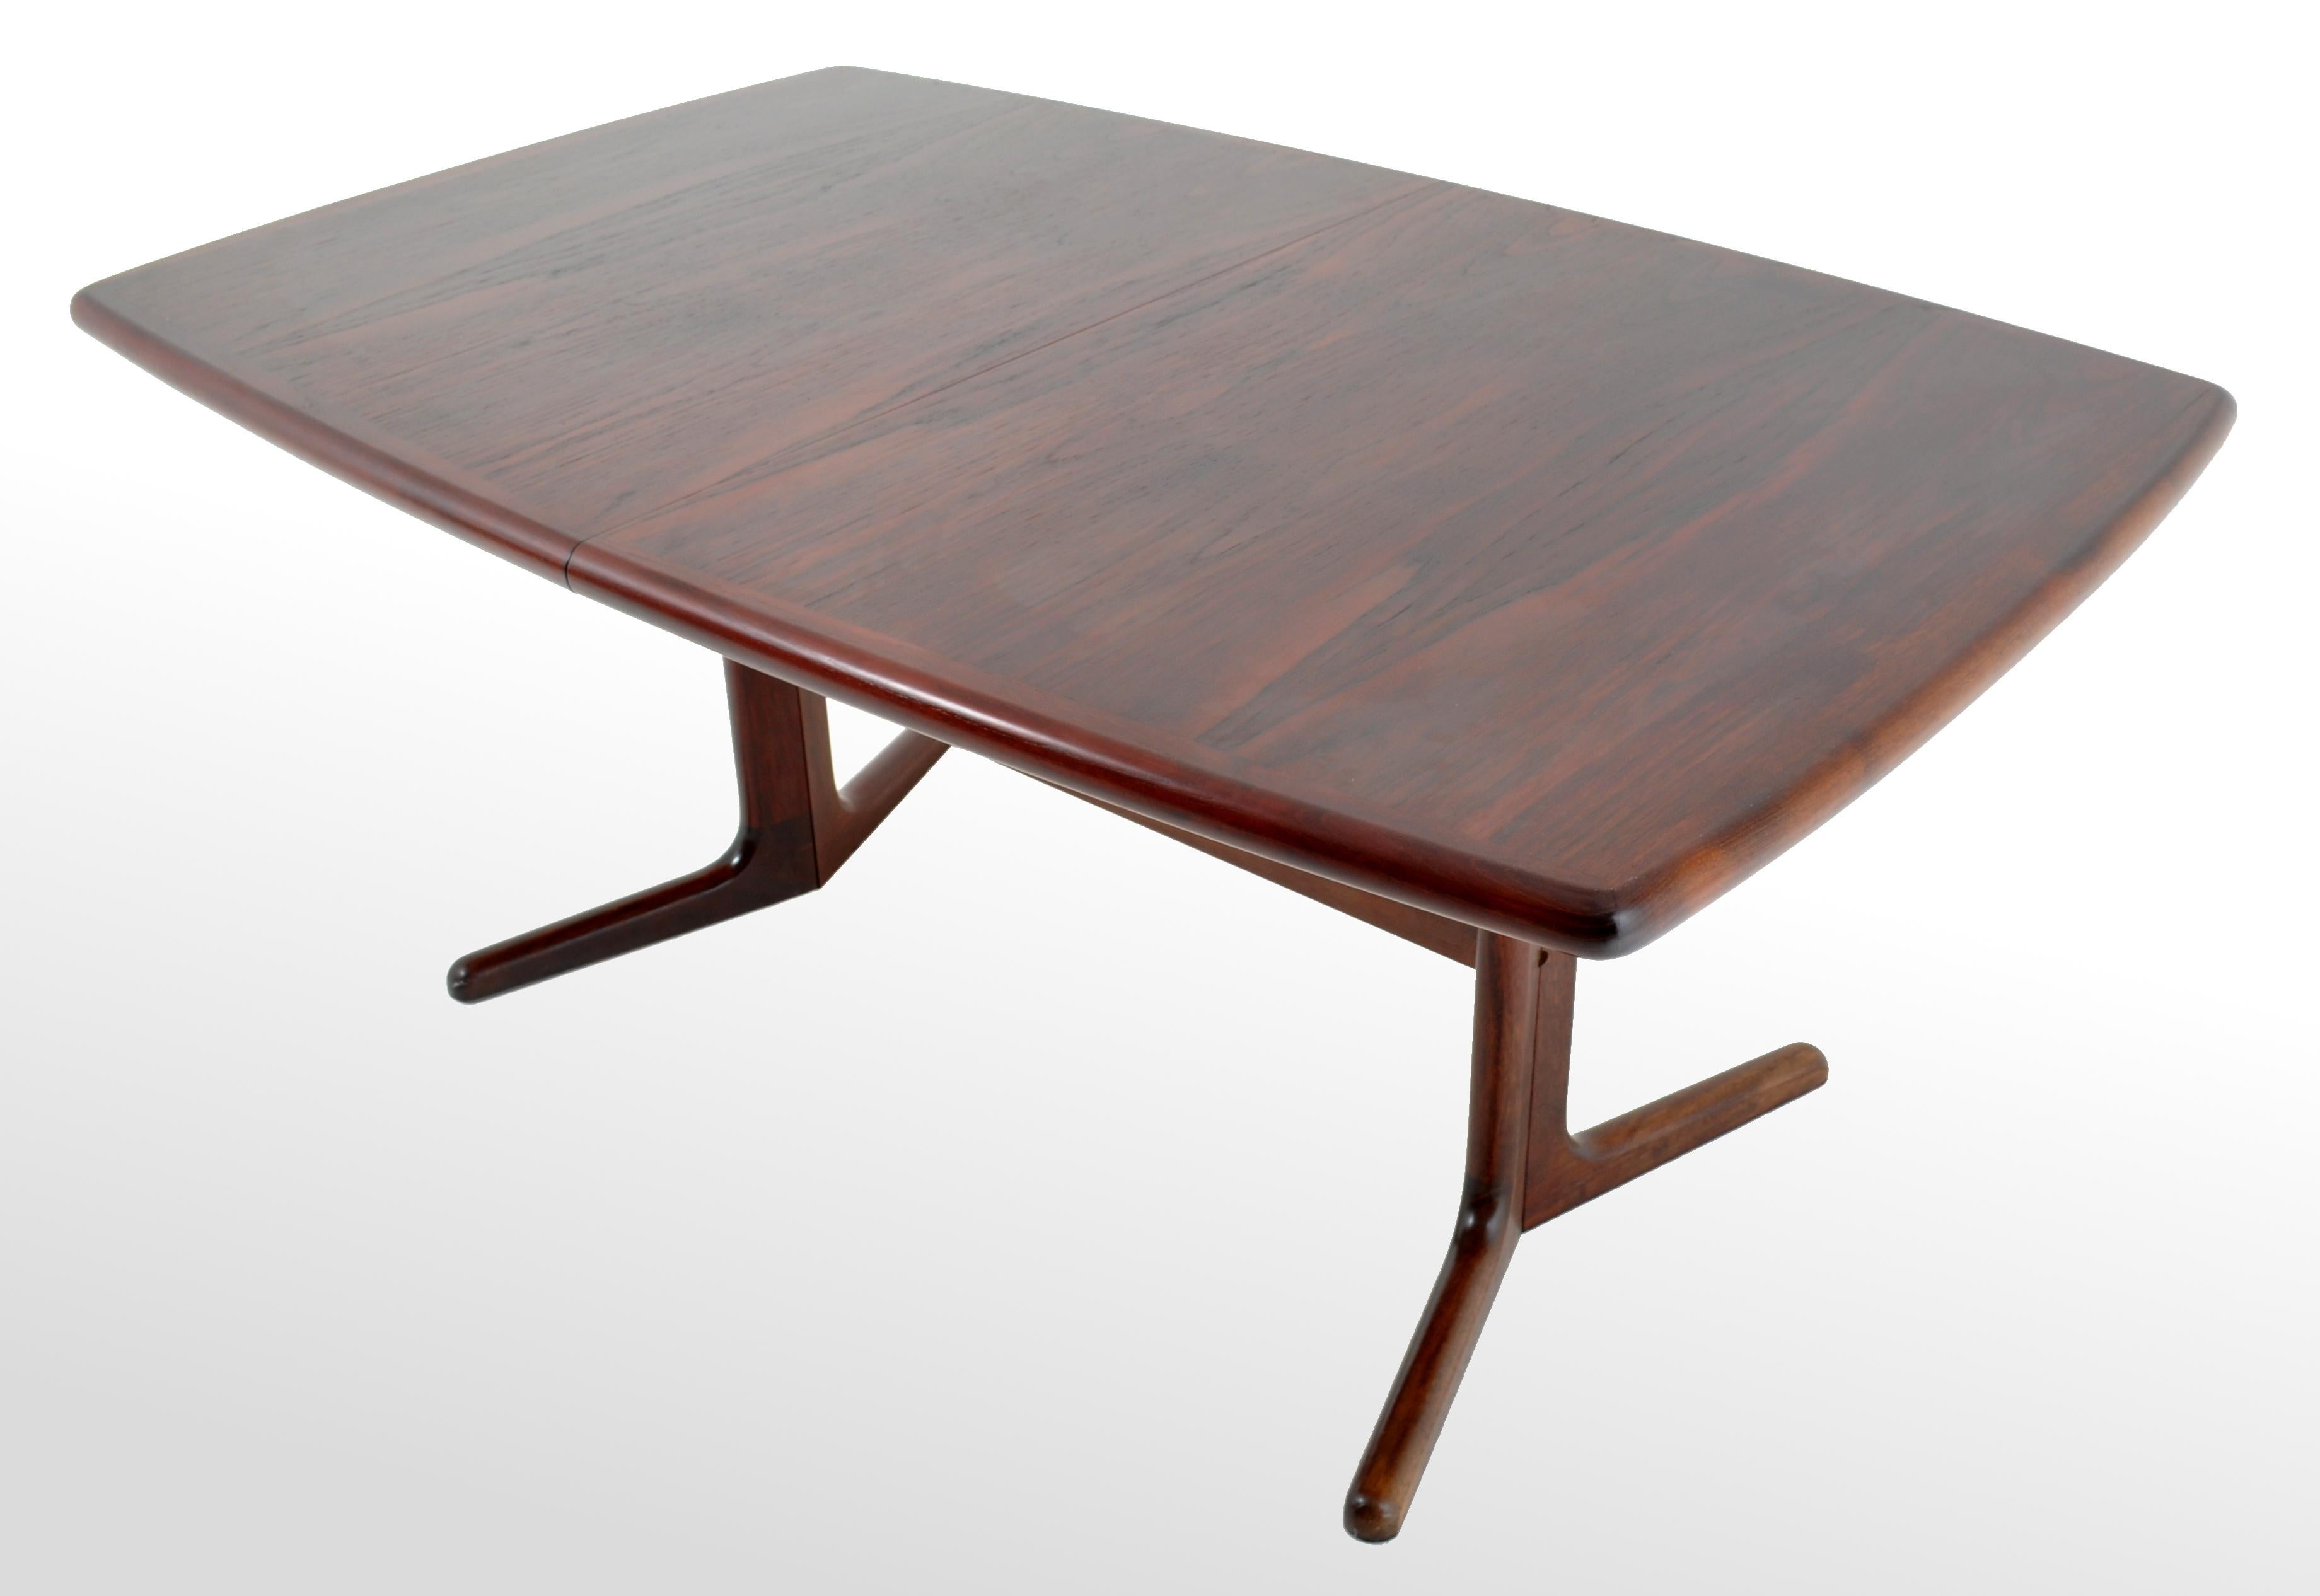 Mid-Century Modern Danish rosewood dining table by Ib Kofod-Larsen, 1960s. The rectangular table top having slightly curvilinear sides and ends. The table extends to receive two 20